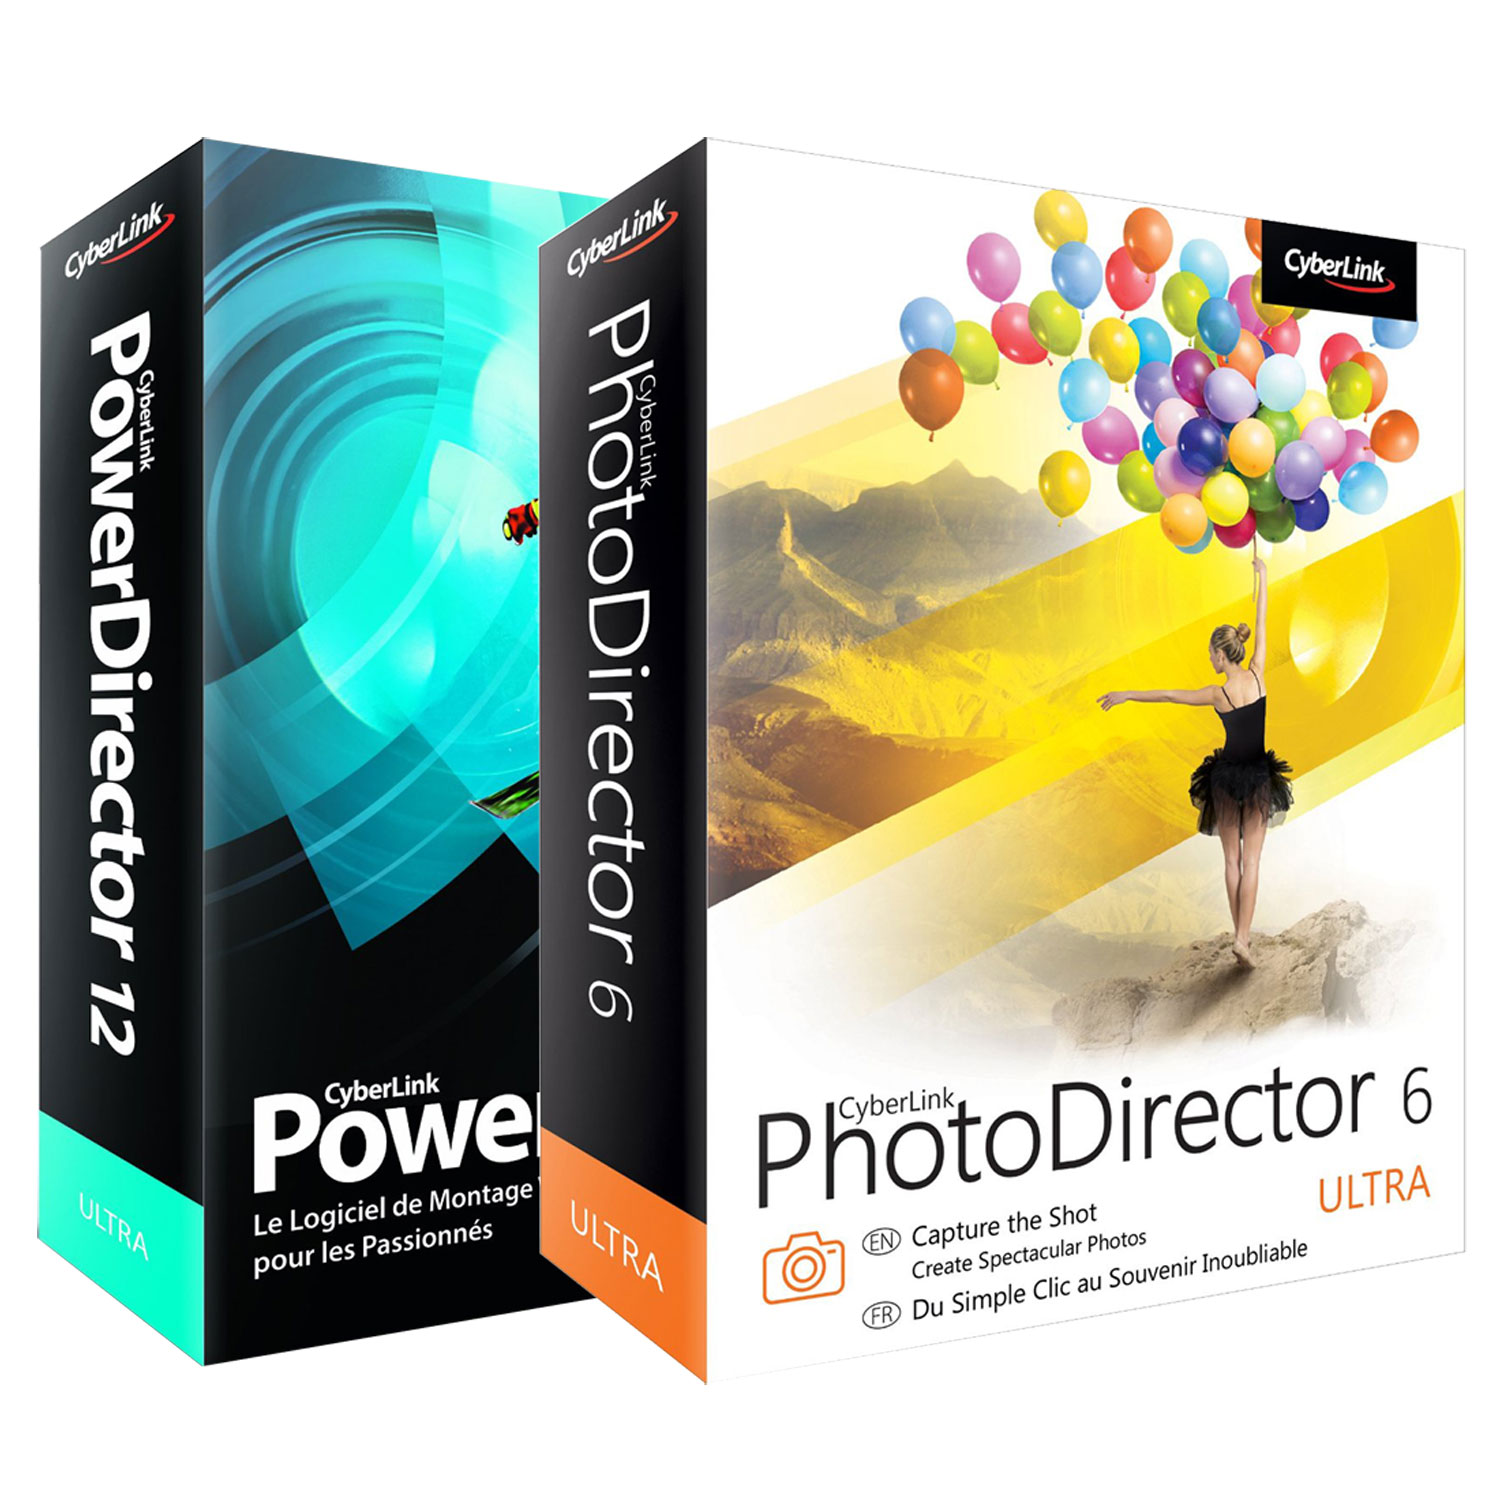 download the last version for windows CyberLink PhotoDirector Ultra 14.7.1906.0